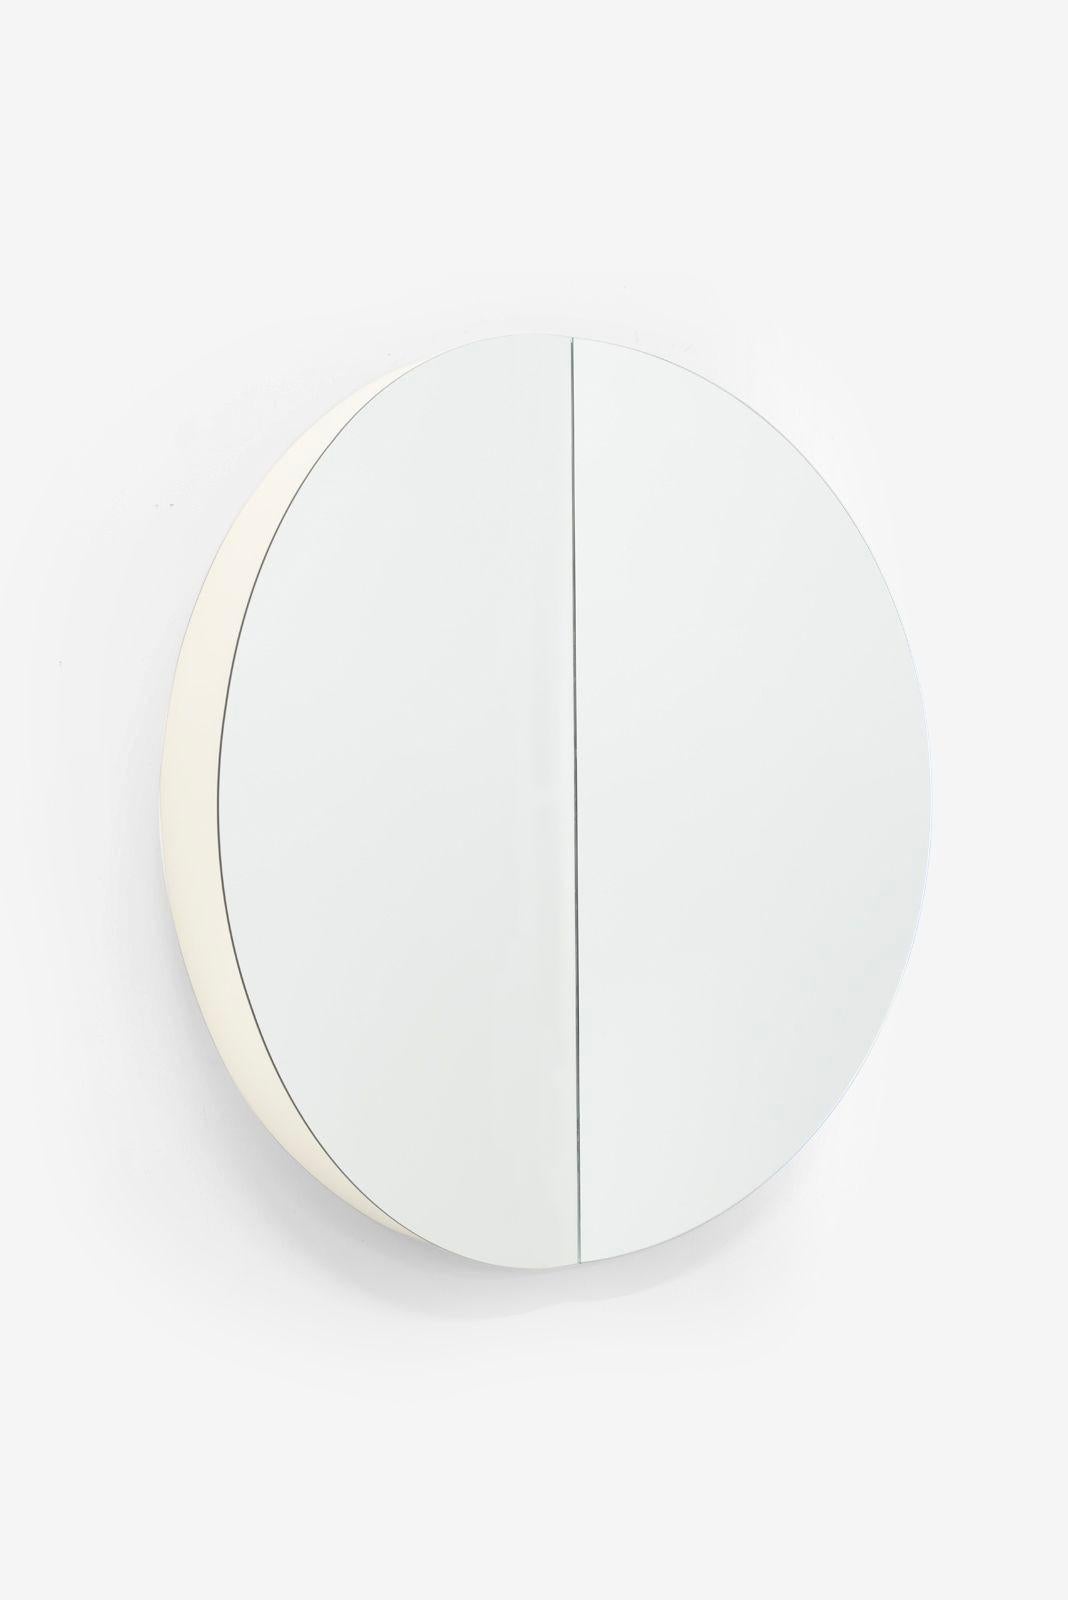 Neal Small Round Split Wall Mirror can be displayed vertically or horizontally, with 2 cleated supports on the backside.
White lacquered 6